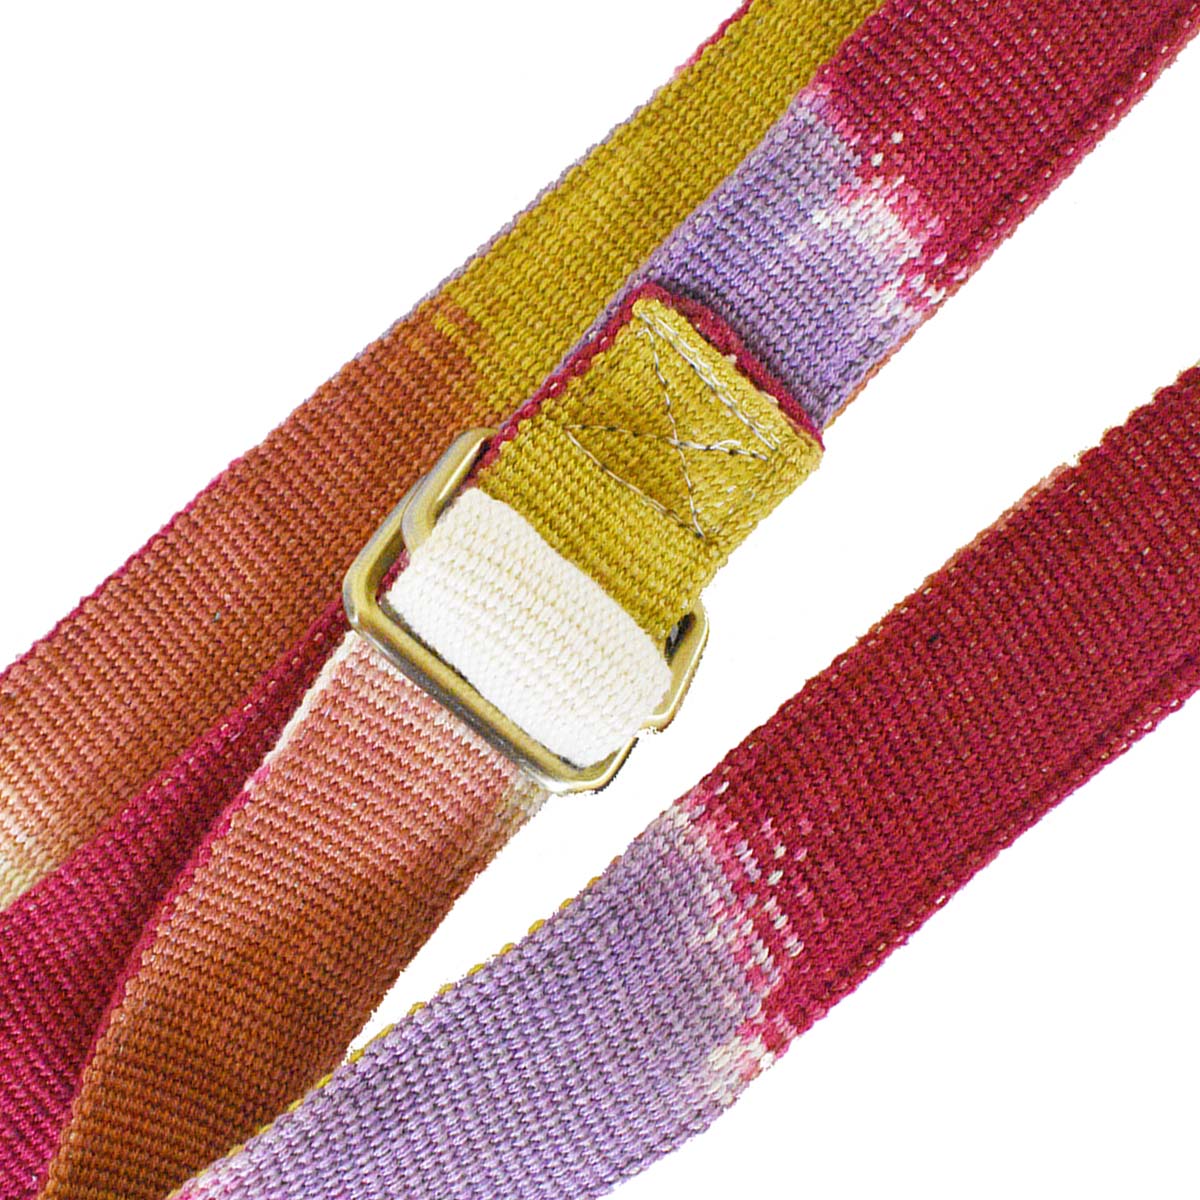 A zoomed-in detail of the Celeste Belt in Raspberry Paleta pattern, with a focus on the buckle. It has a watercolor red, purple, yellow ochre, and white pattern.